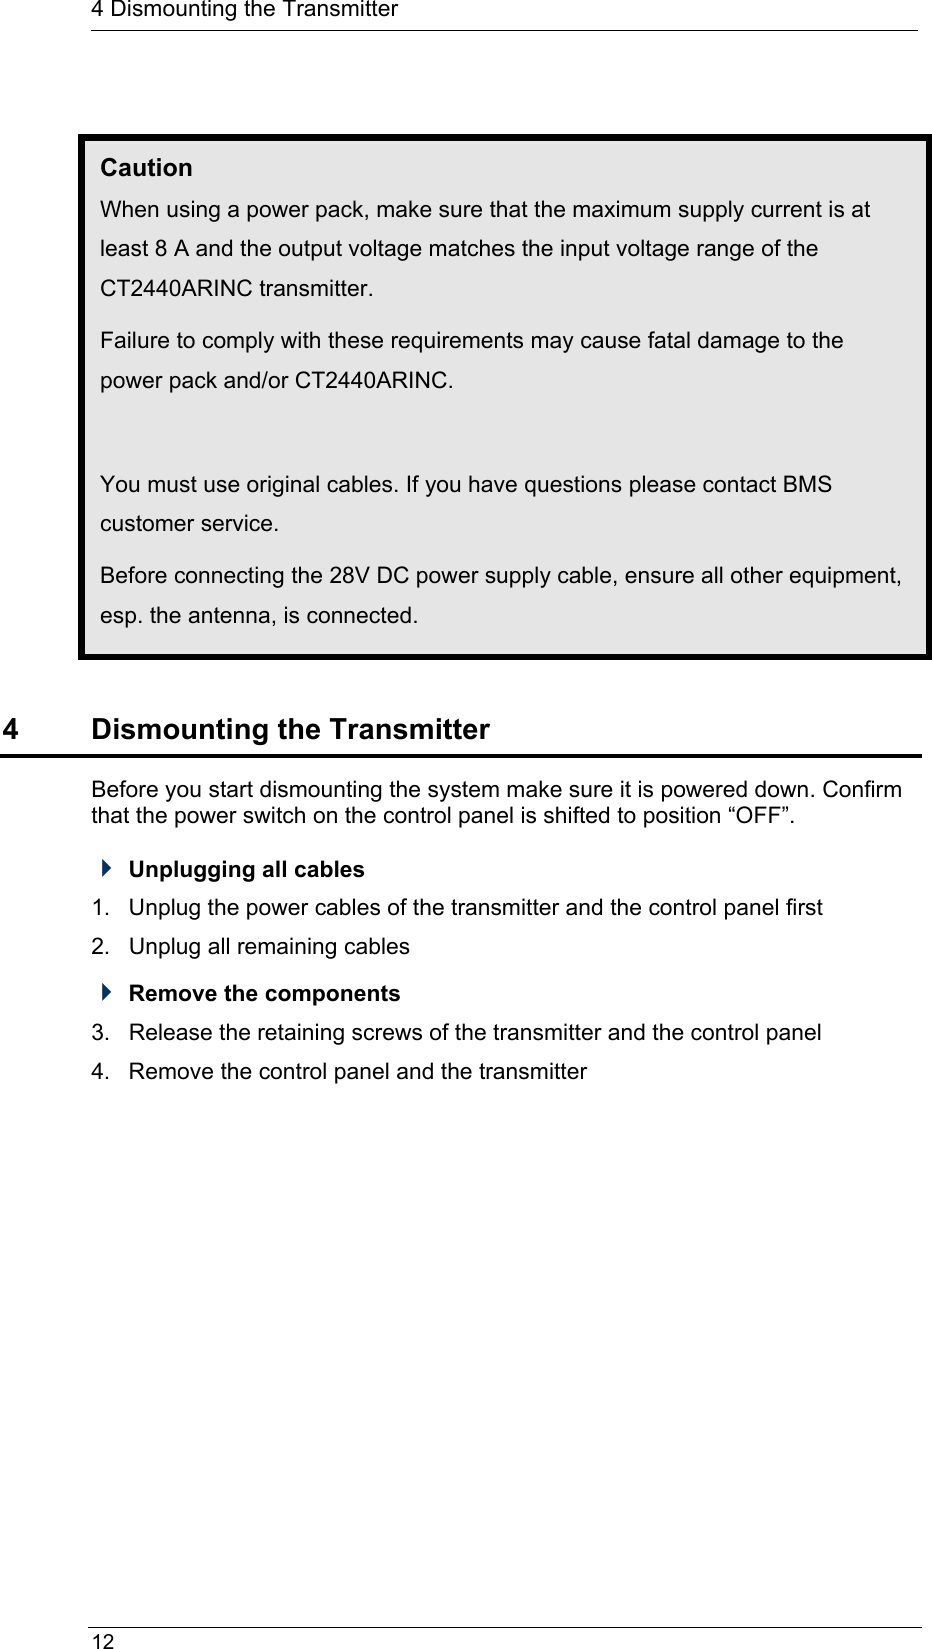  12  4 Dismounting the Transmitter  Caution When using a power pack, make sure that the maximum supply current is at least 8 A and the output voltage matches the input voltage range of the CT2440ARINC transmitter. Failure to comply with these requirements may cause fatal damage to the power pack and/or CT2440ARINC.  You must use original cables. If you have questions please contact BMS customer service. Before connecting the 28V DC power supply cable, ensure all other equipment, esp. the antenna, is connected.  4  Dismounting the Transmitter Before you start dismounting the system make sure it is powered down. Confirm that the power switch on the control panel is shifted to position “OFF”.  Unplugging all cables 1.  Unplug the power cables of the transmitter and the control panel first 2.  Unplug all remaining cables  Remove the components 3.  Release the retaining screws of the transmitter and the control panel 4.  Remove the control panel and the transmitter